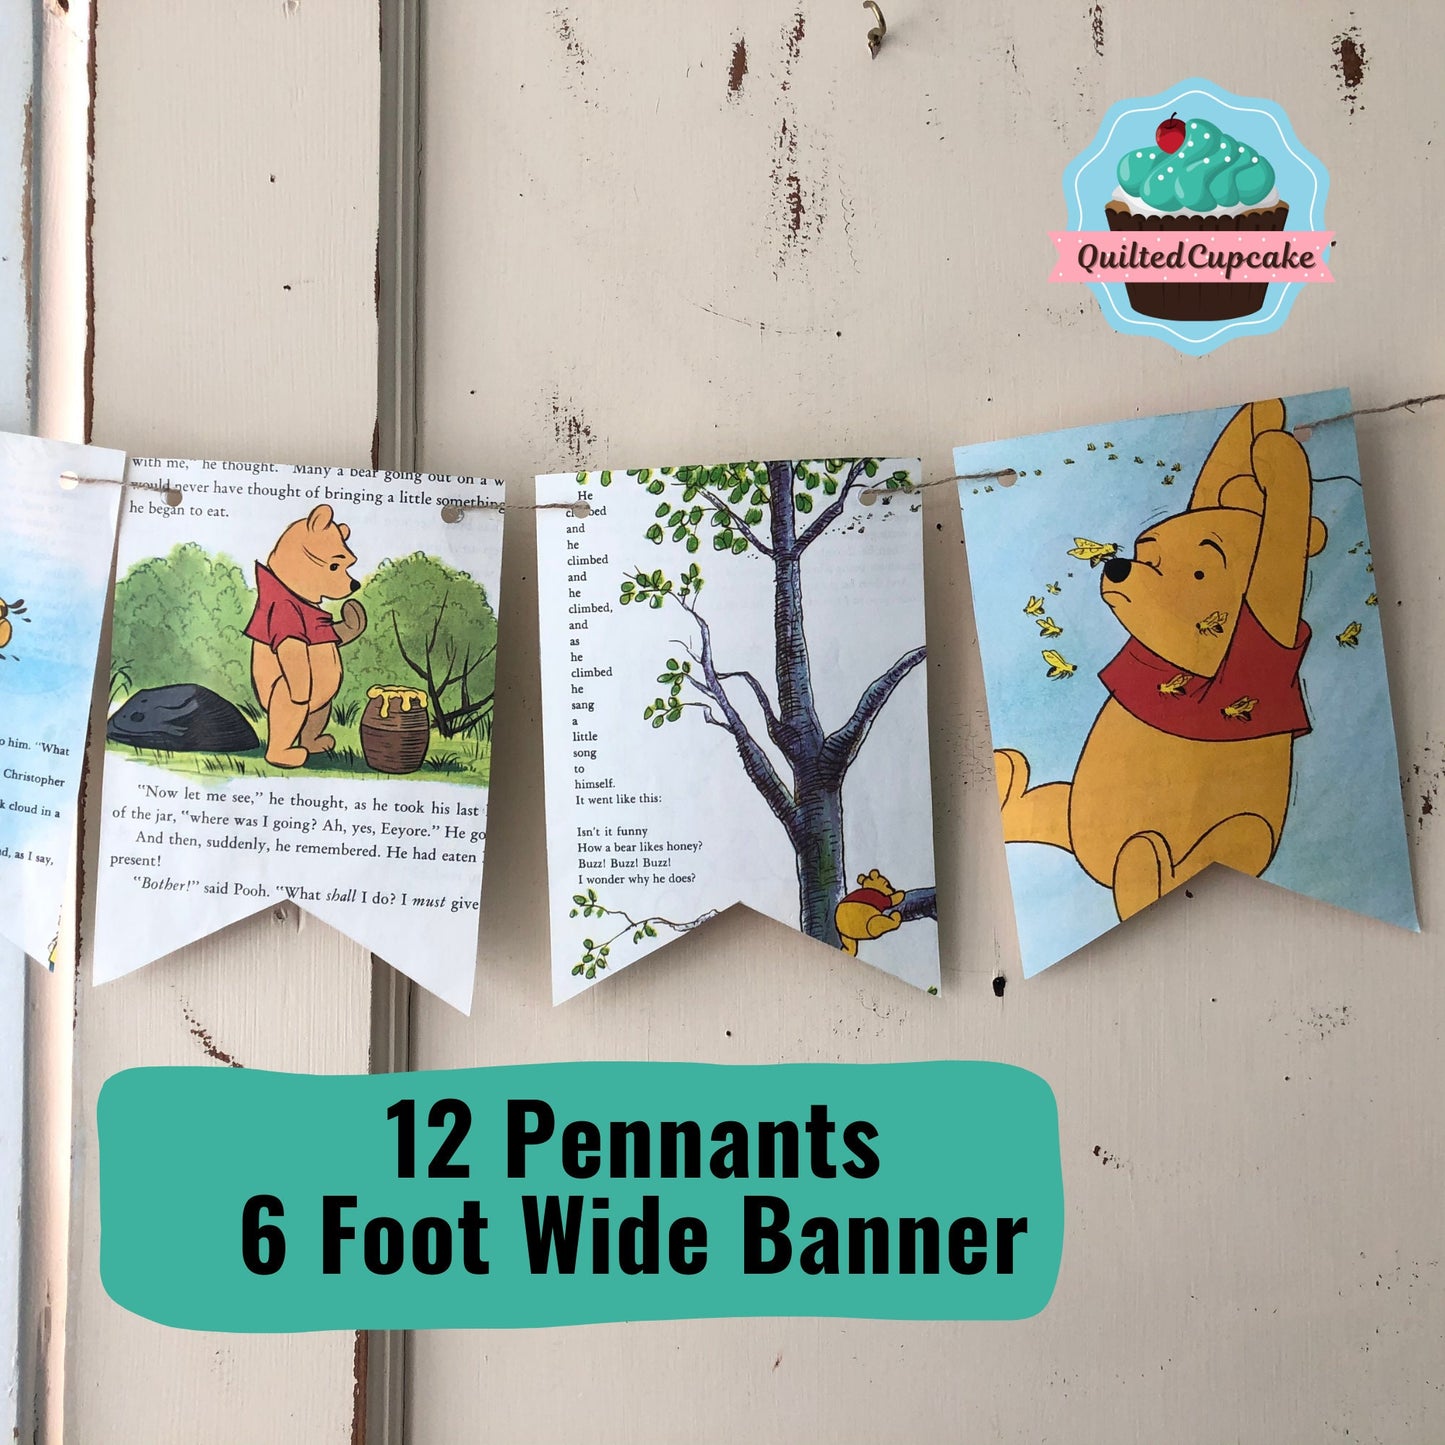 Winnie the Pooh Party/ Pooh Story Book Page Garland Banner. 6 ft backdrop for Baby Shower, Birthday Party, Nursery Decor/READY to SHIP